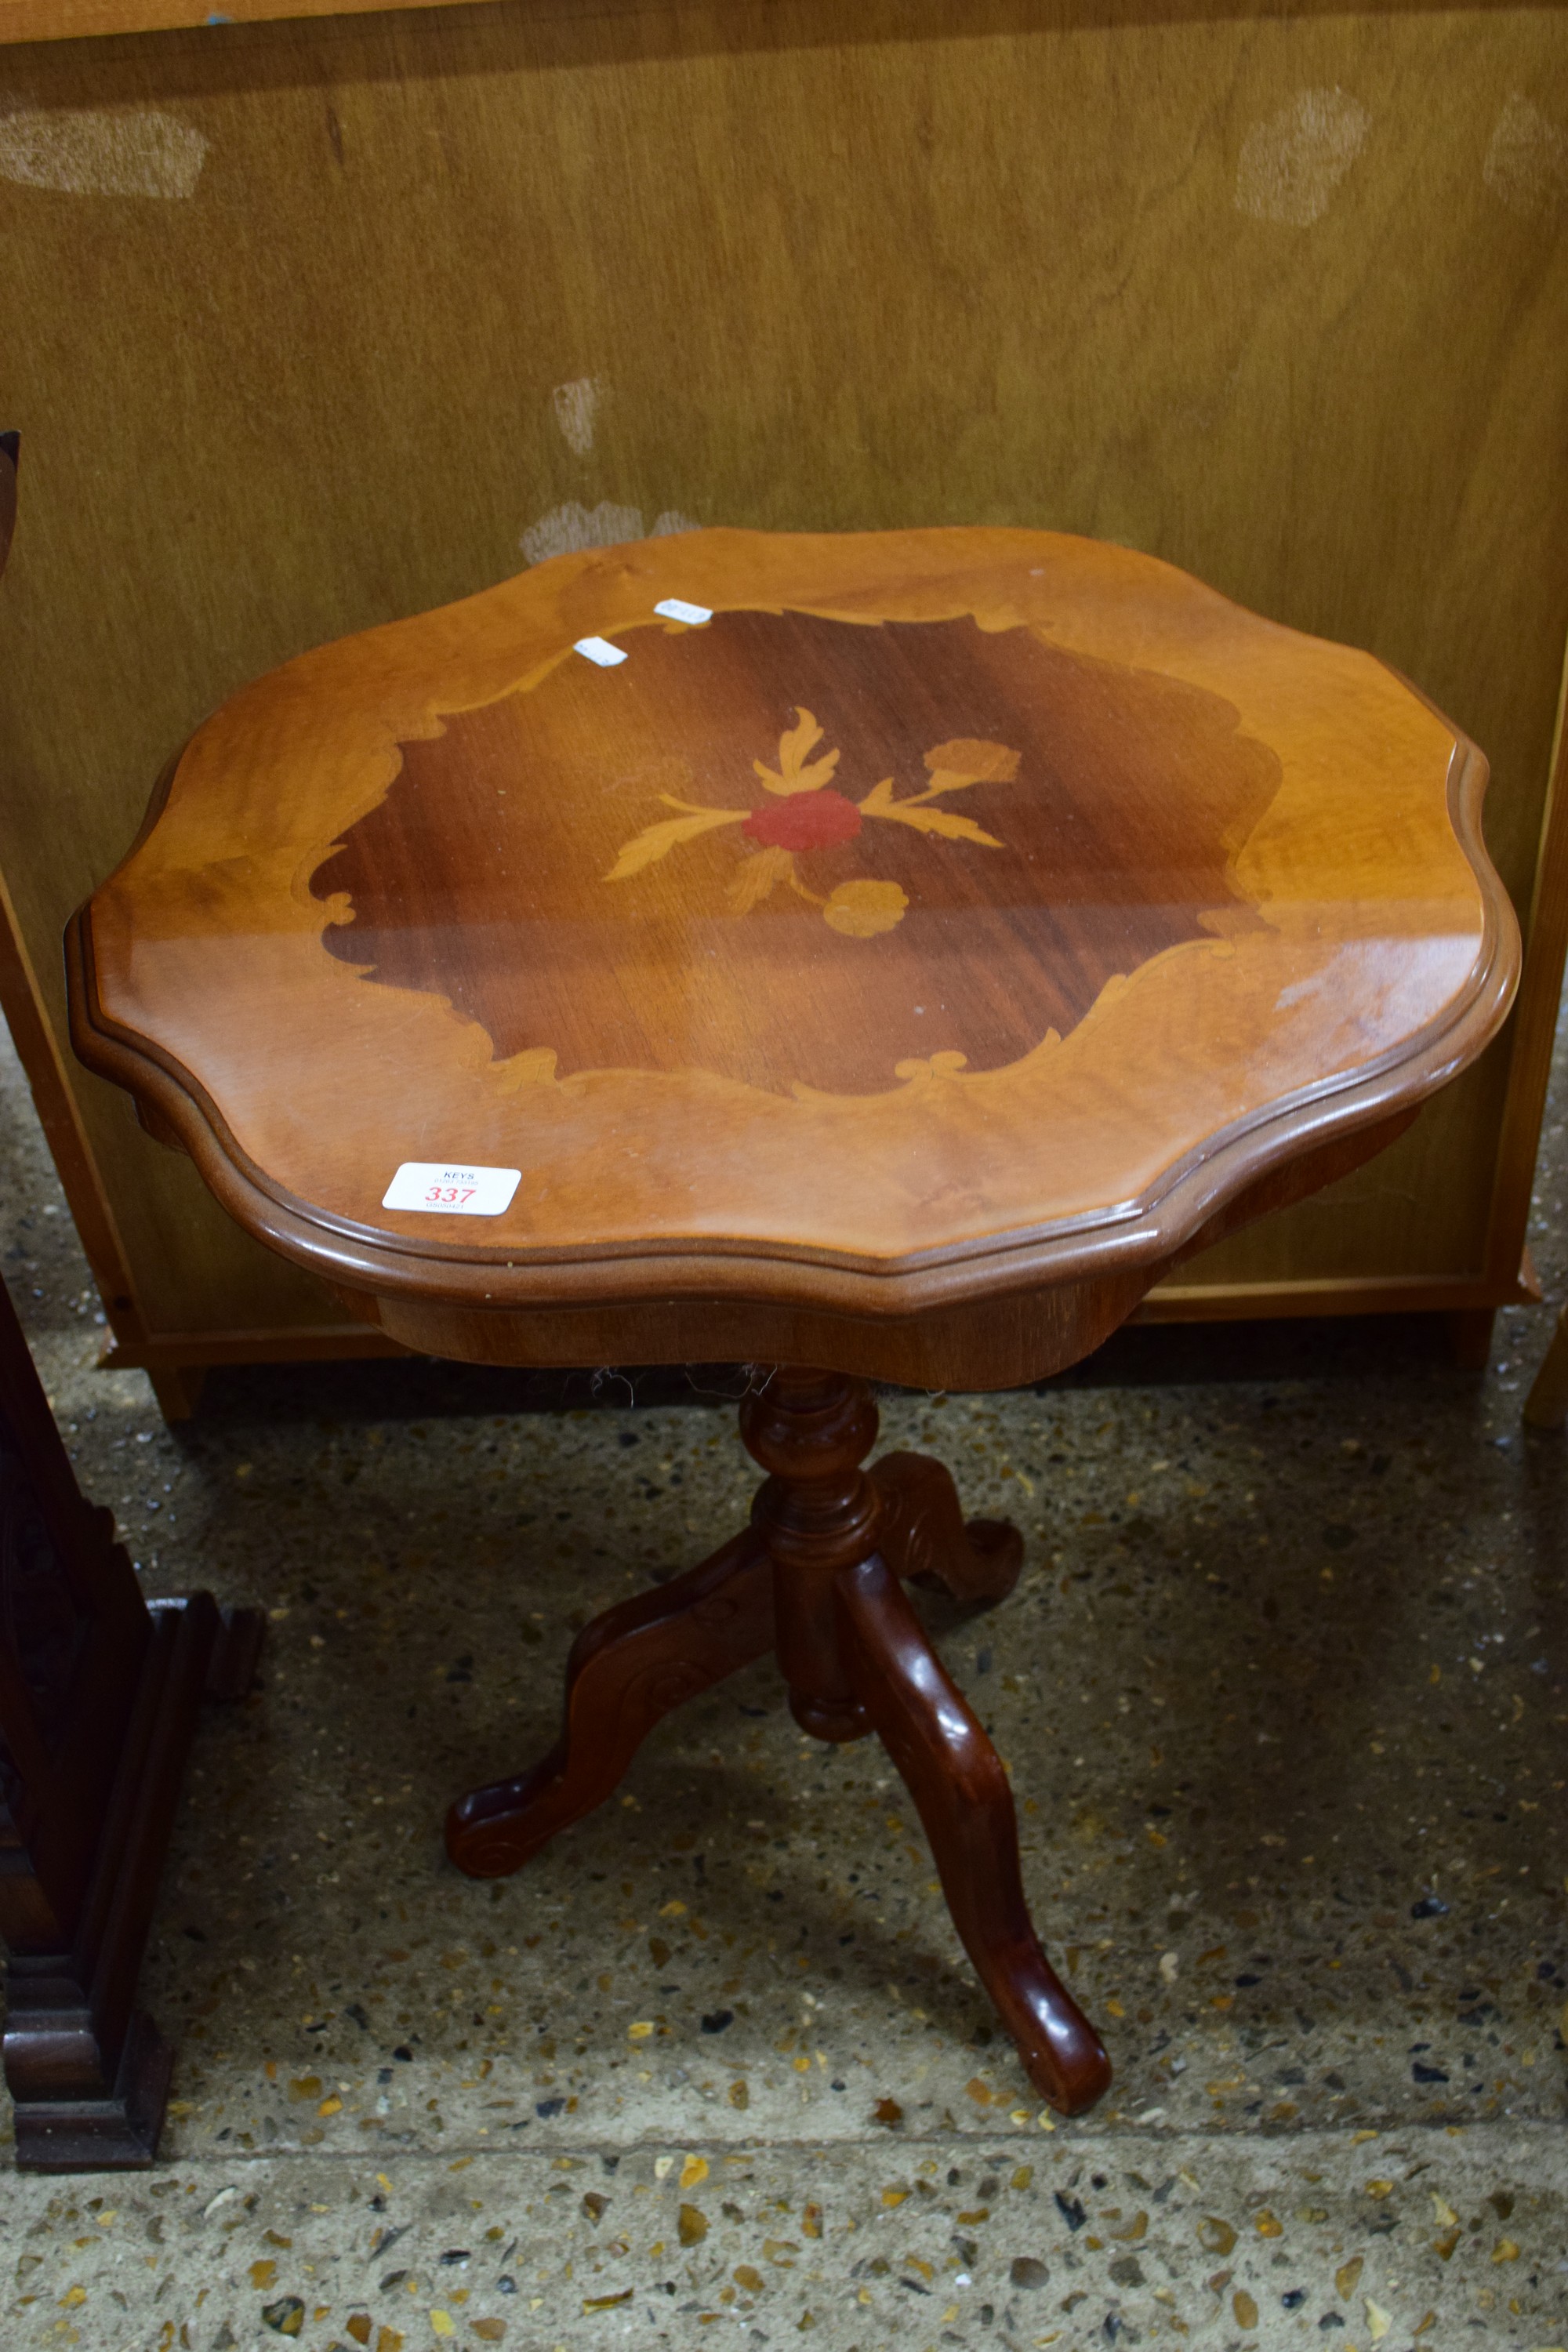 GOOD QUALITY REPRODUCTION OCCASIONAL TABLE WITH SCALLOPED EDGE, APPROX 53CM DIAM MAX